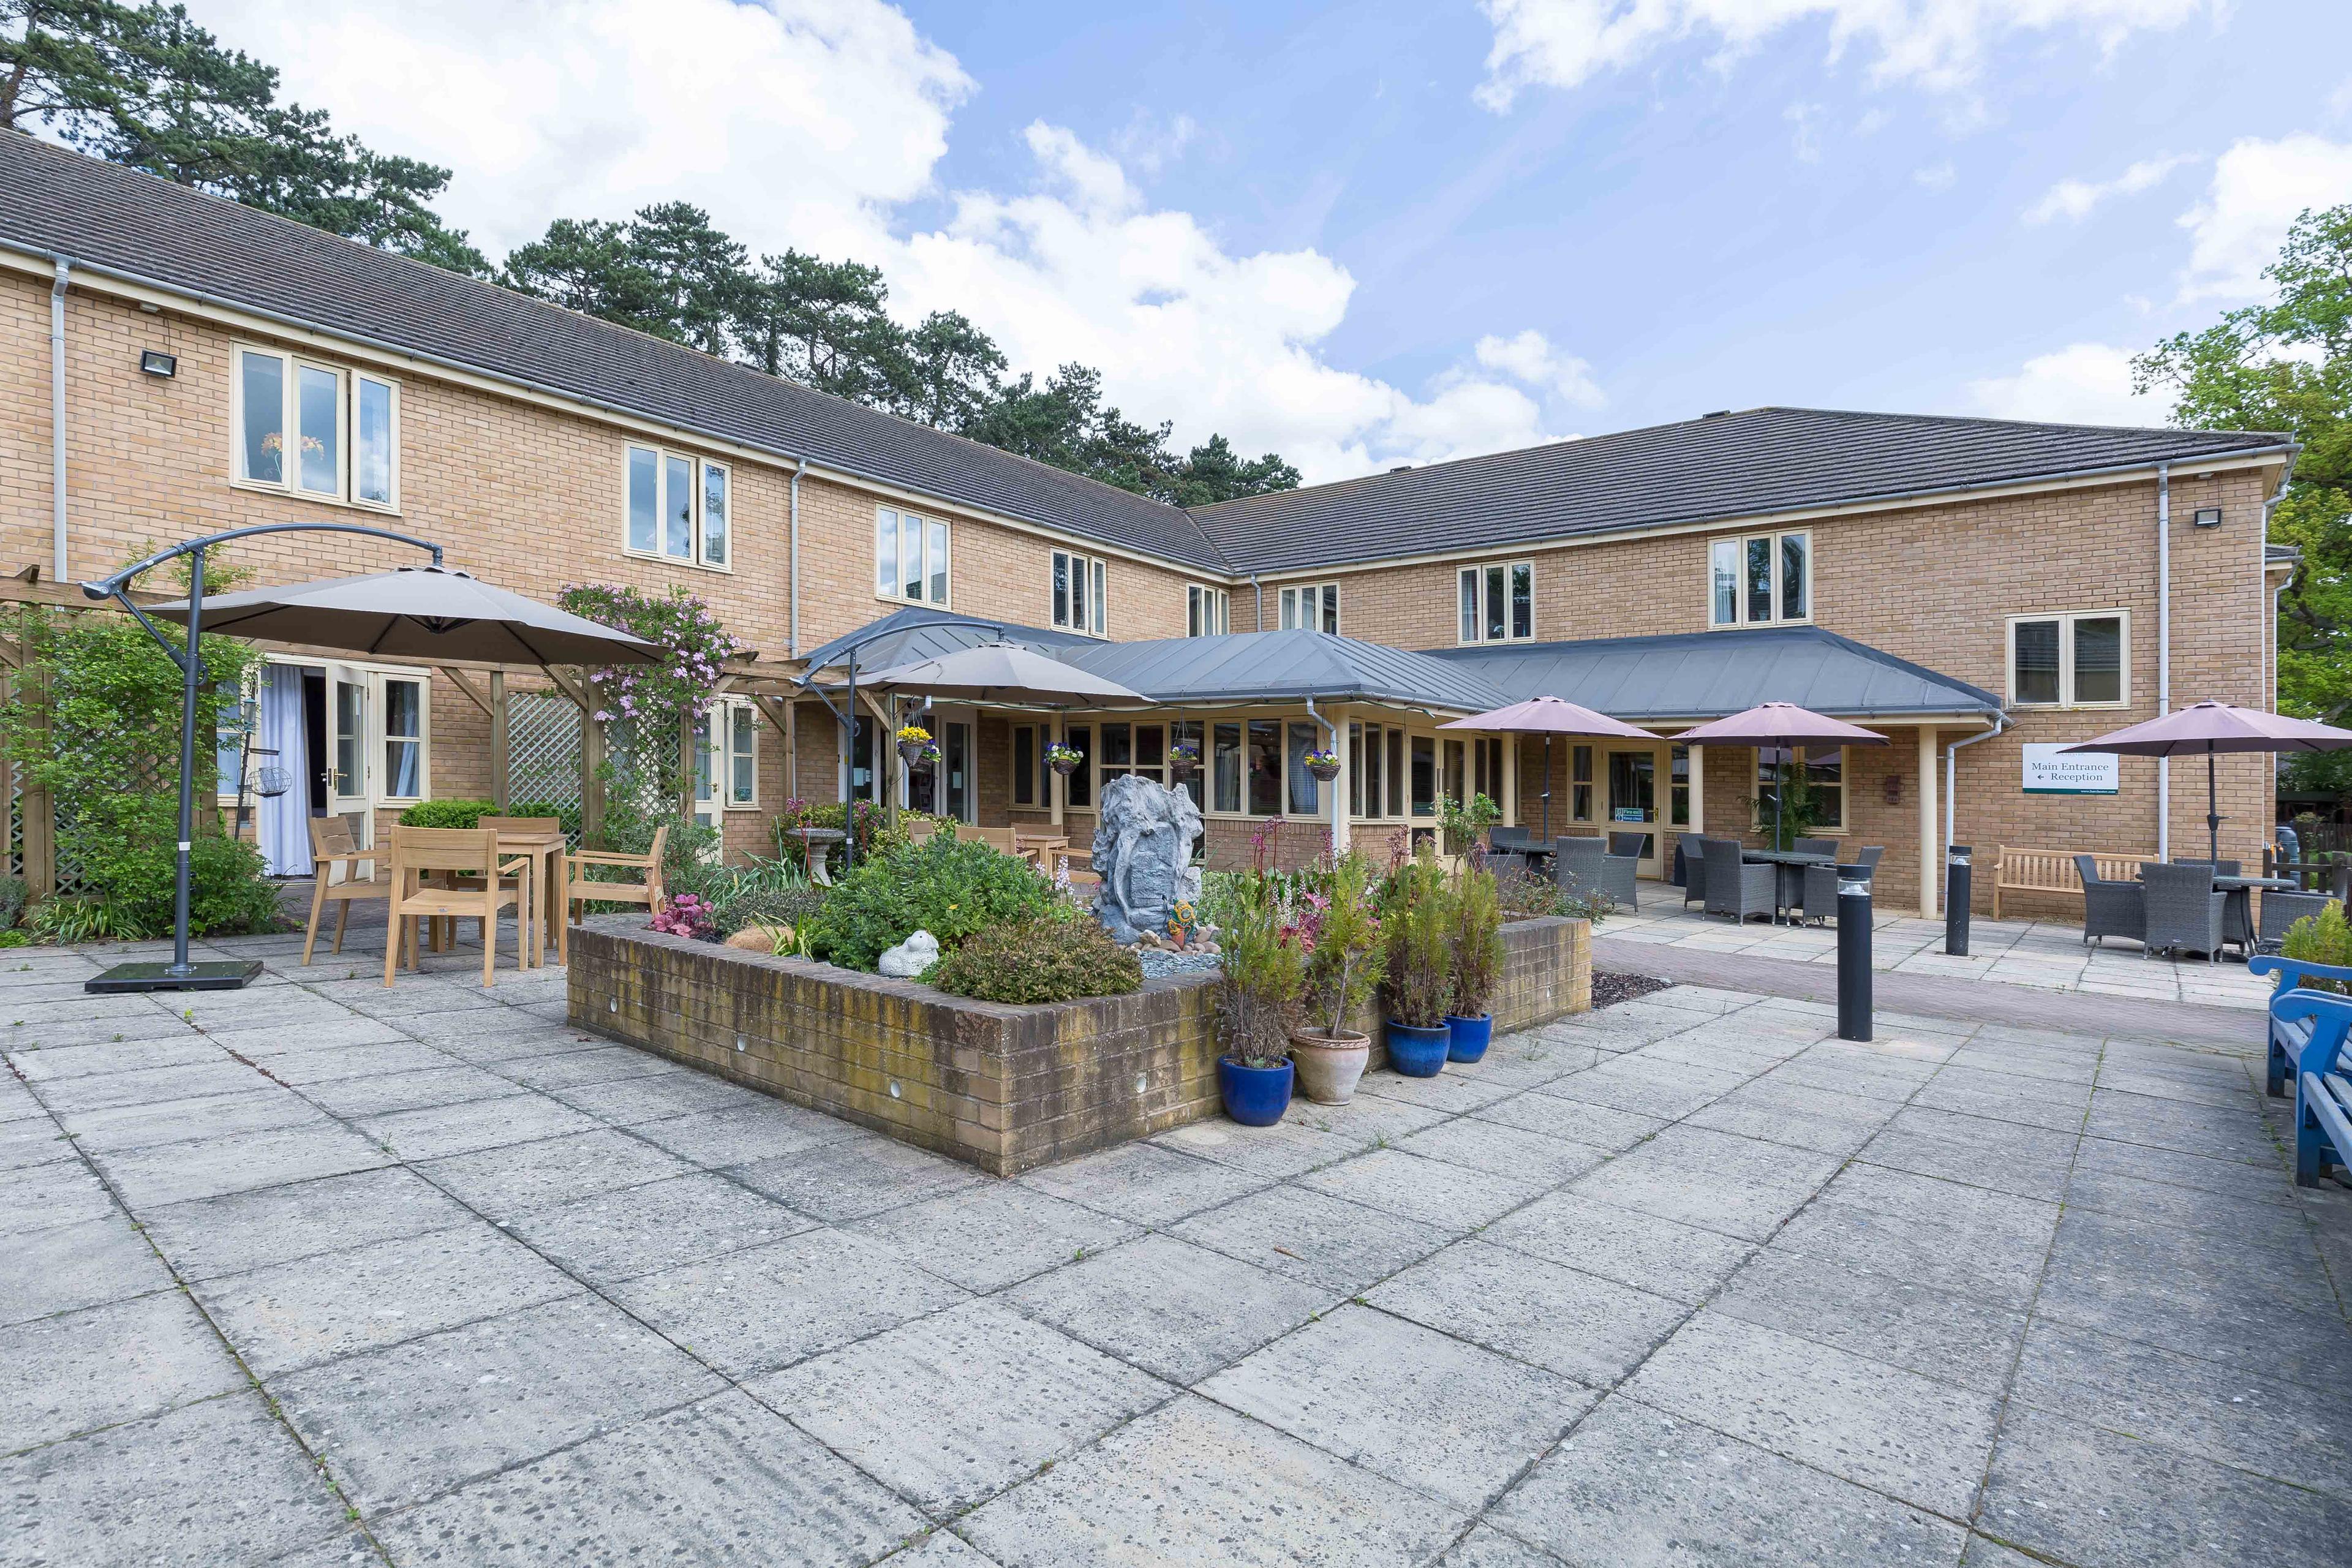 Chater Lodge Care Home